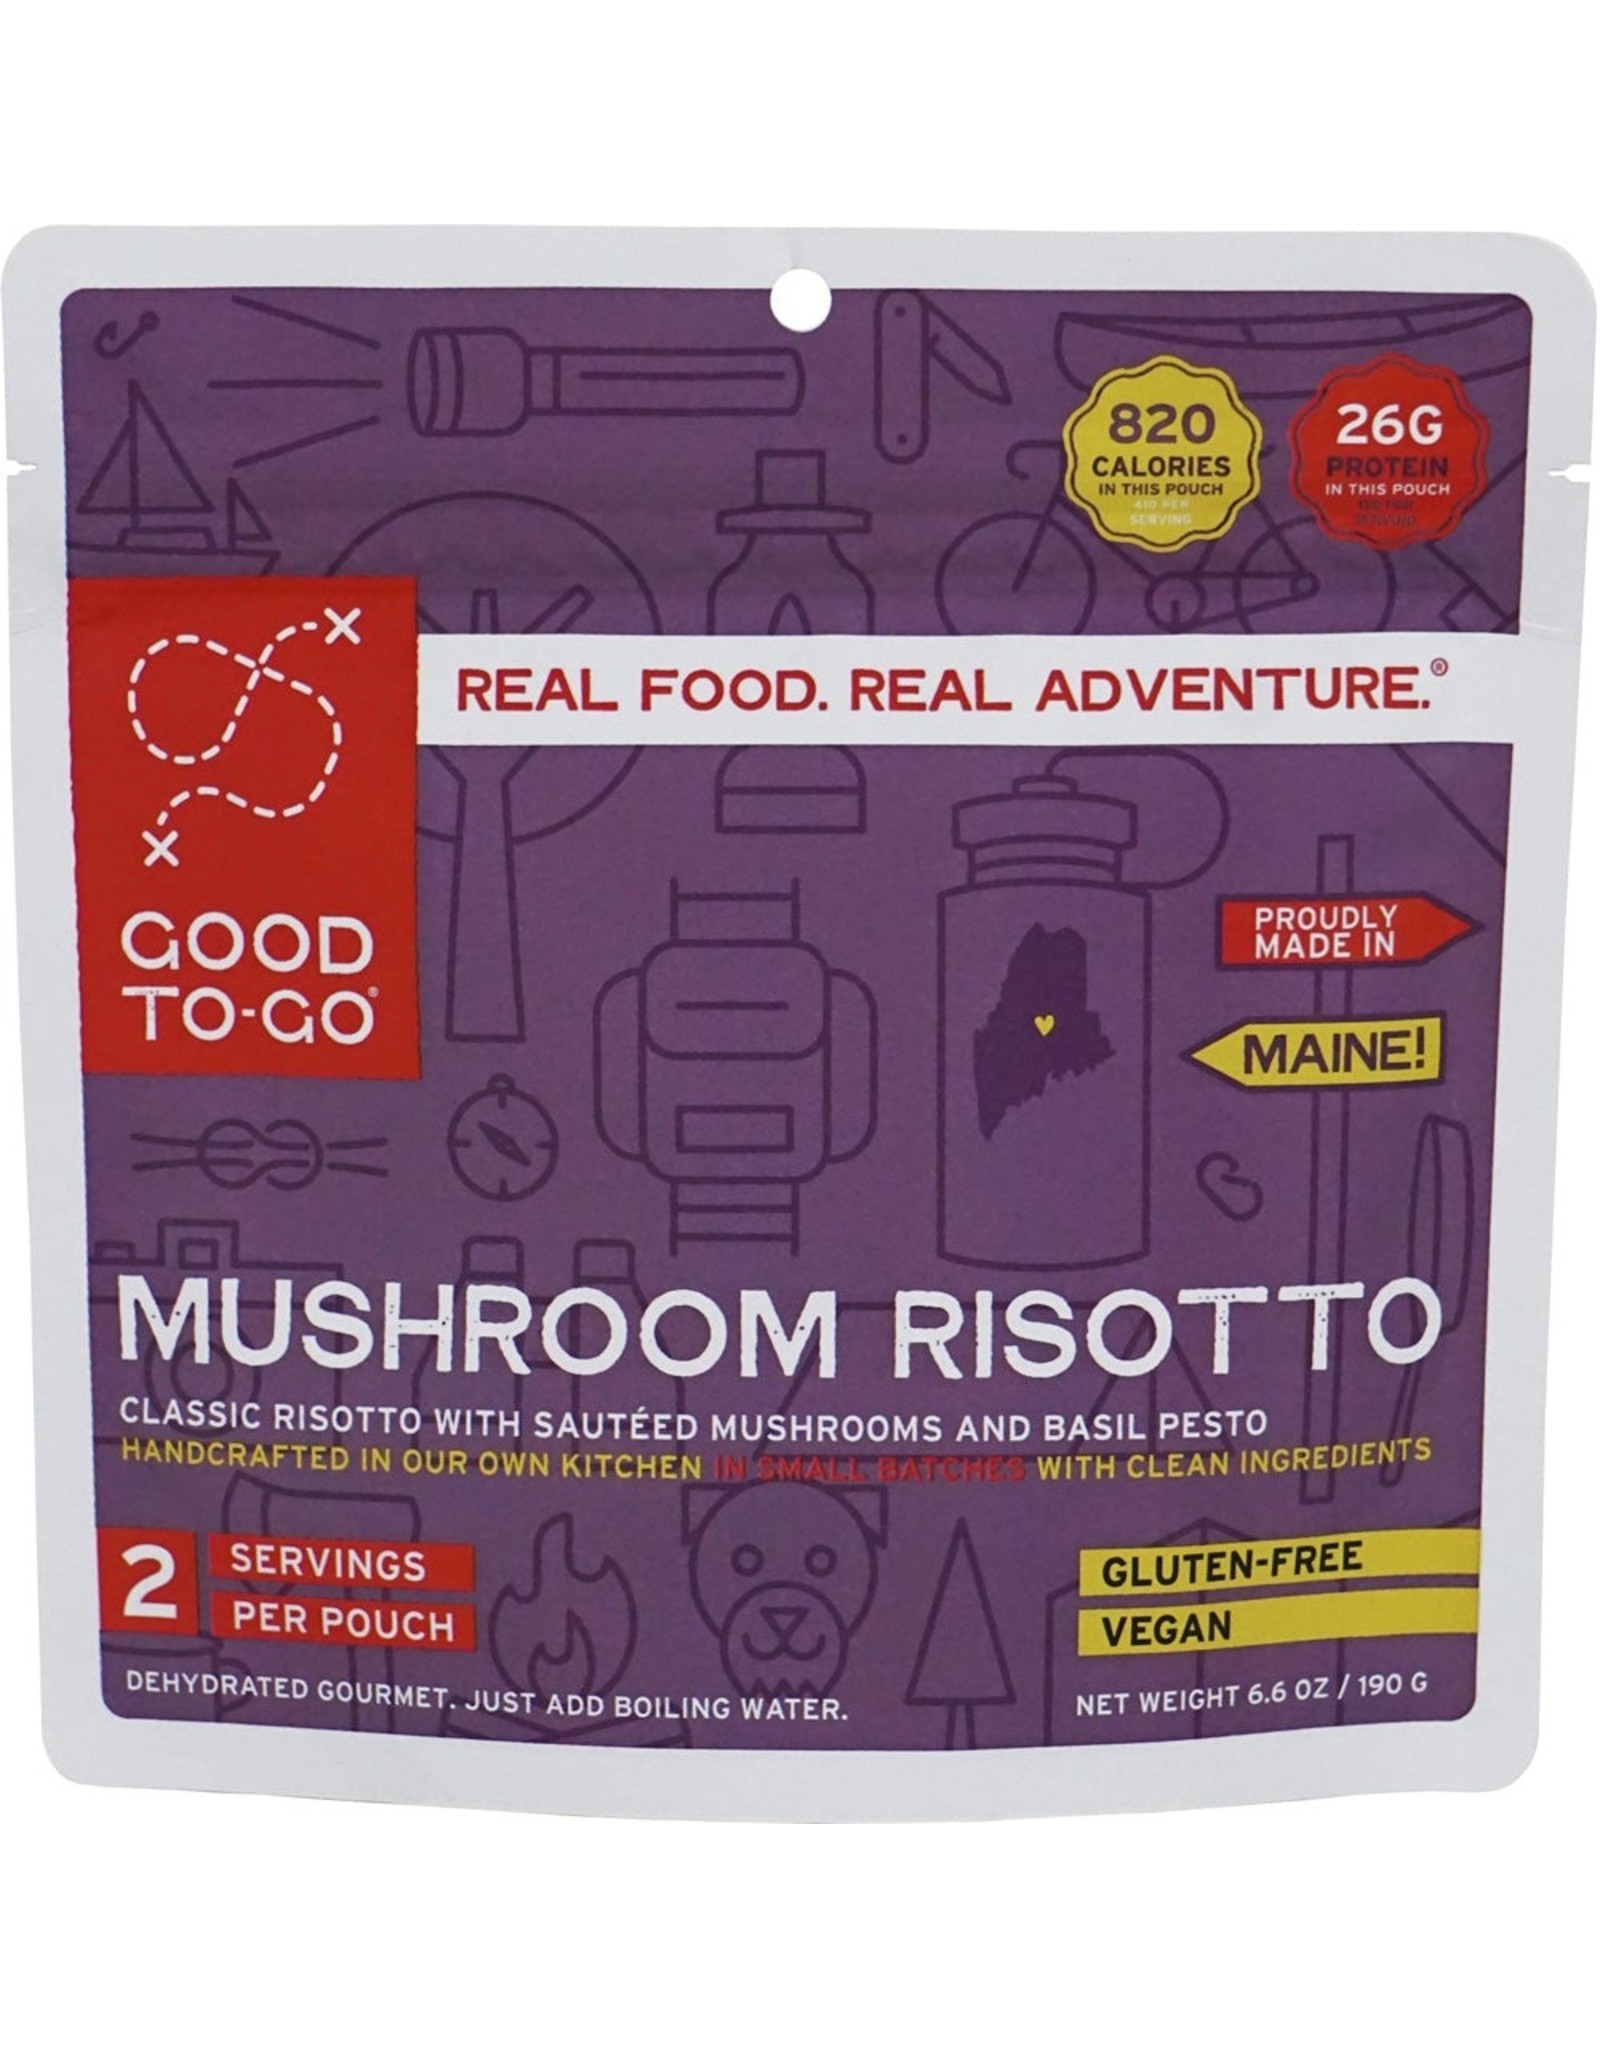 Good to Go Good-To-Go - Single, Herbed Mushroom Risotto